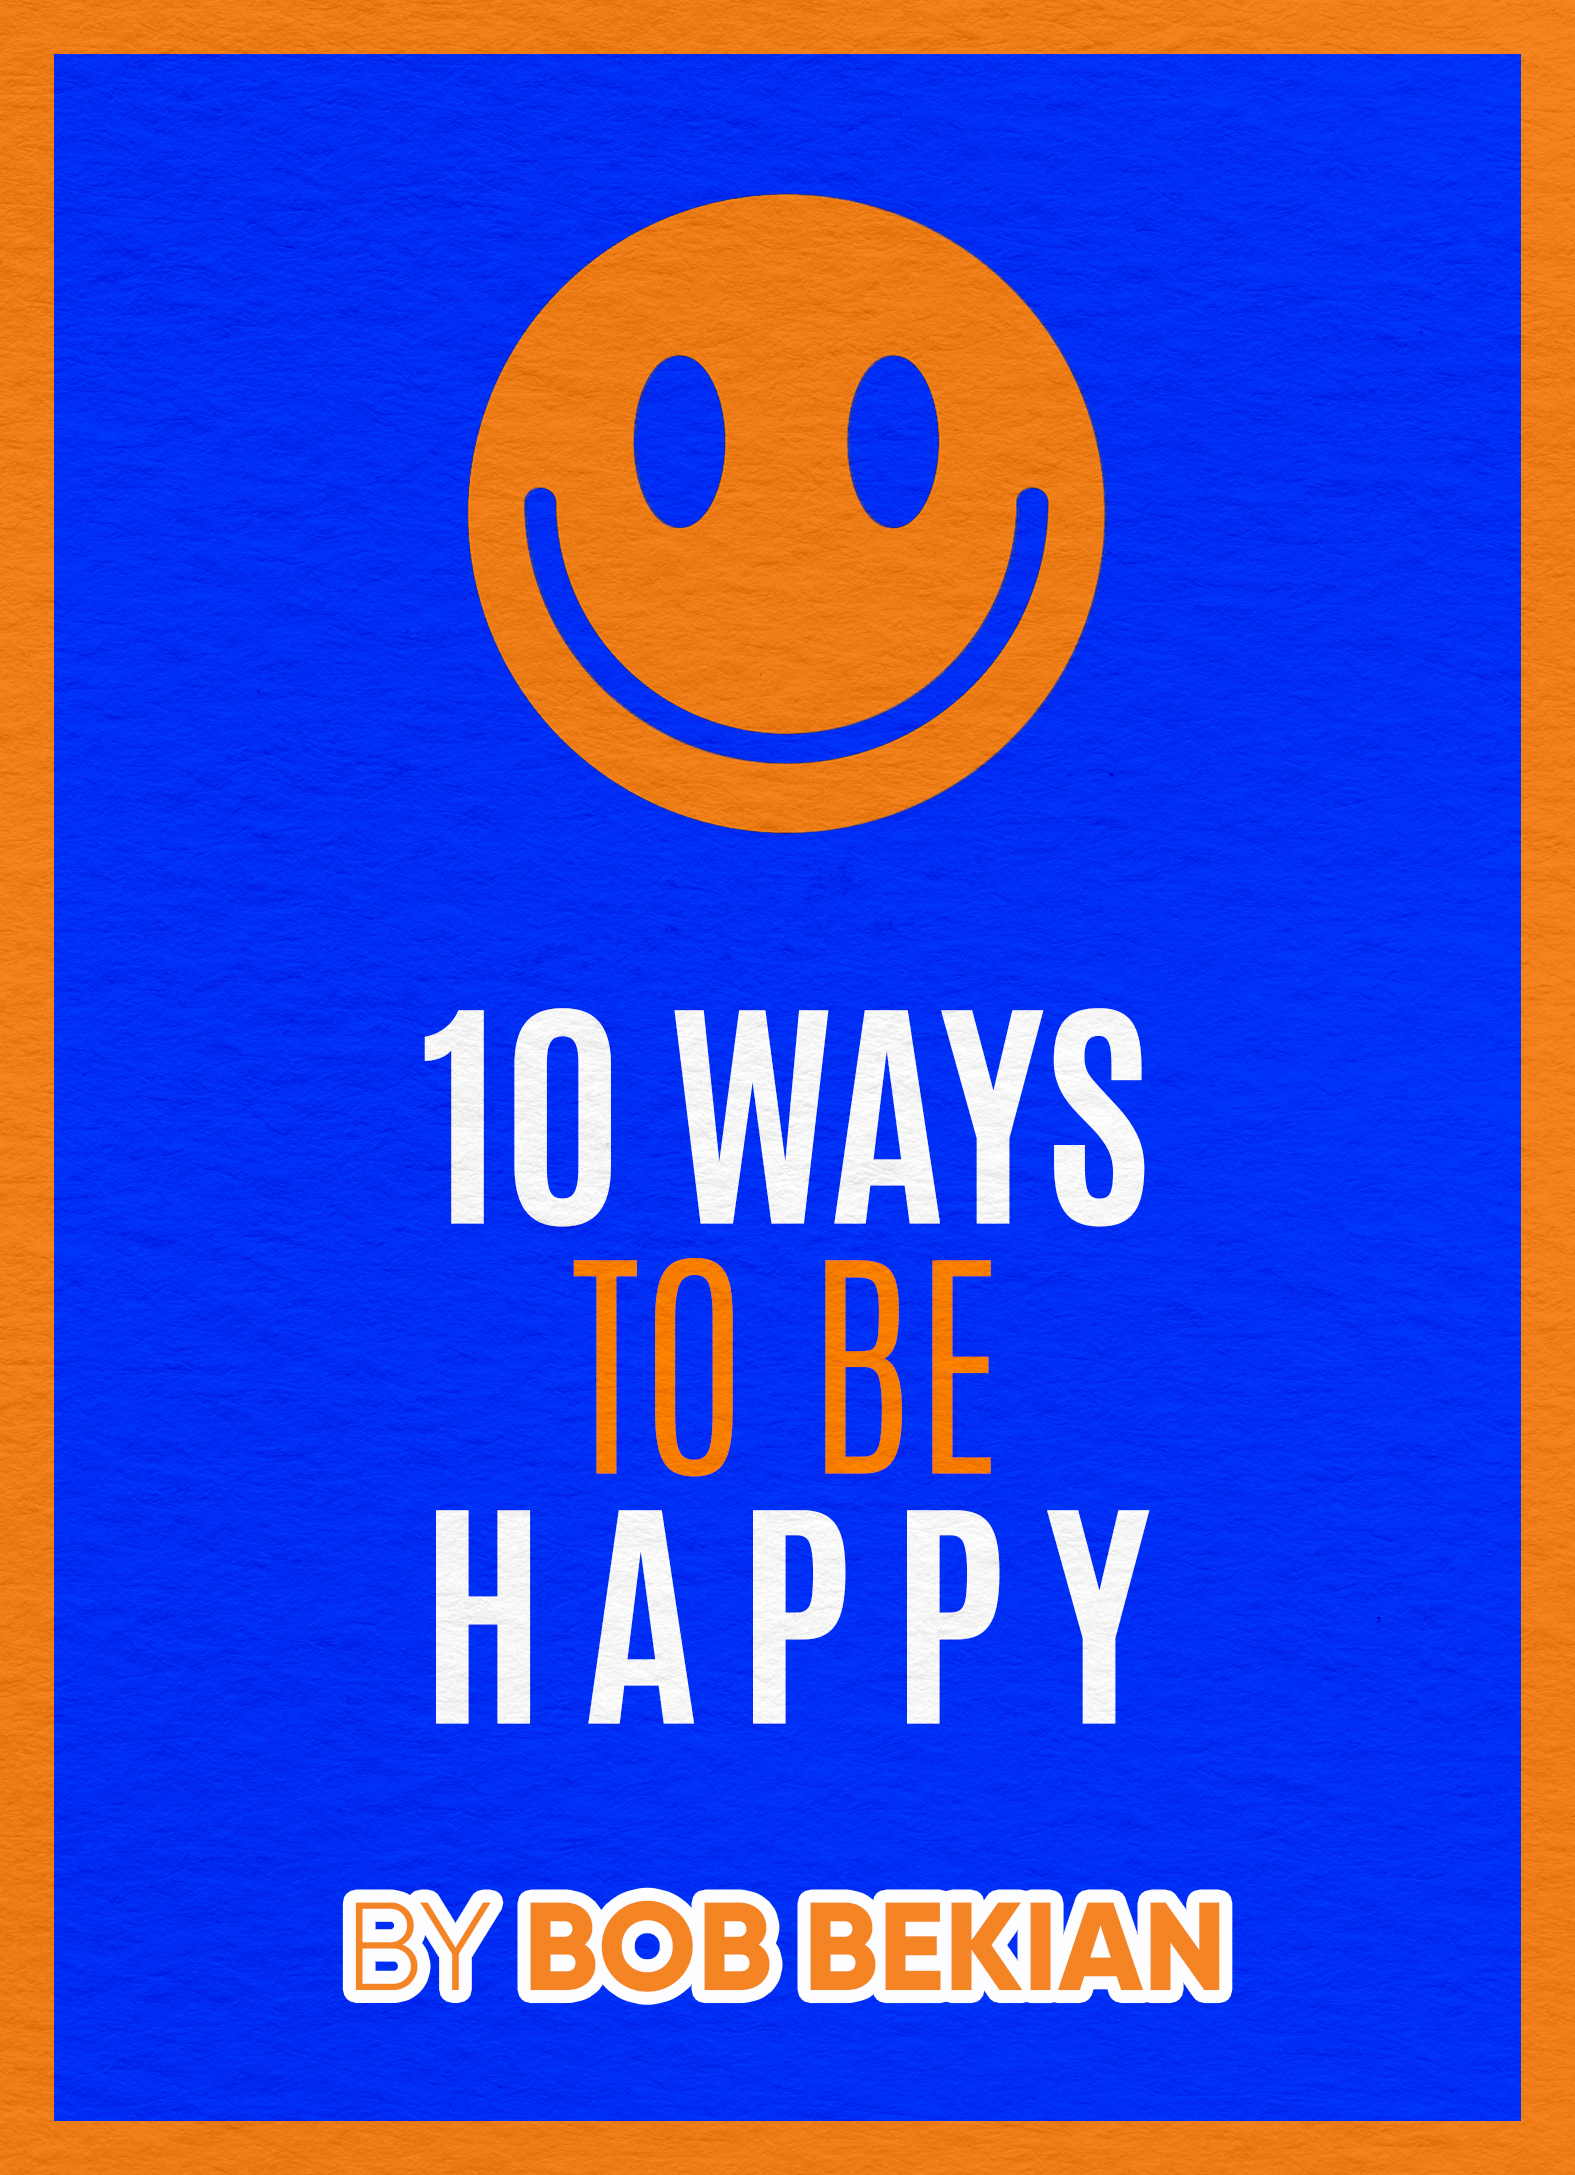 10 Ways To Be Happy by Bob Bekian Book Cover